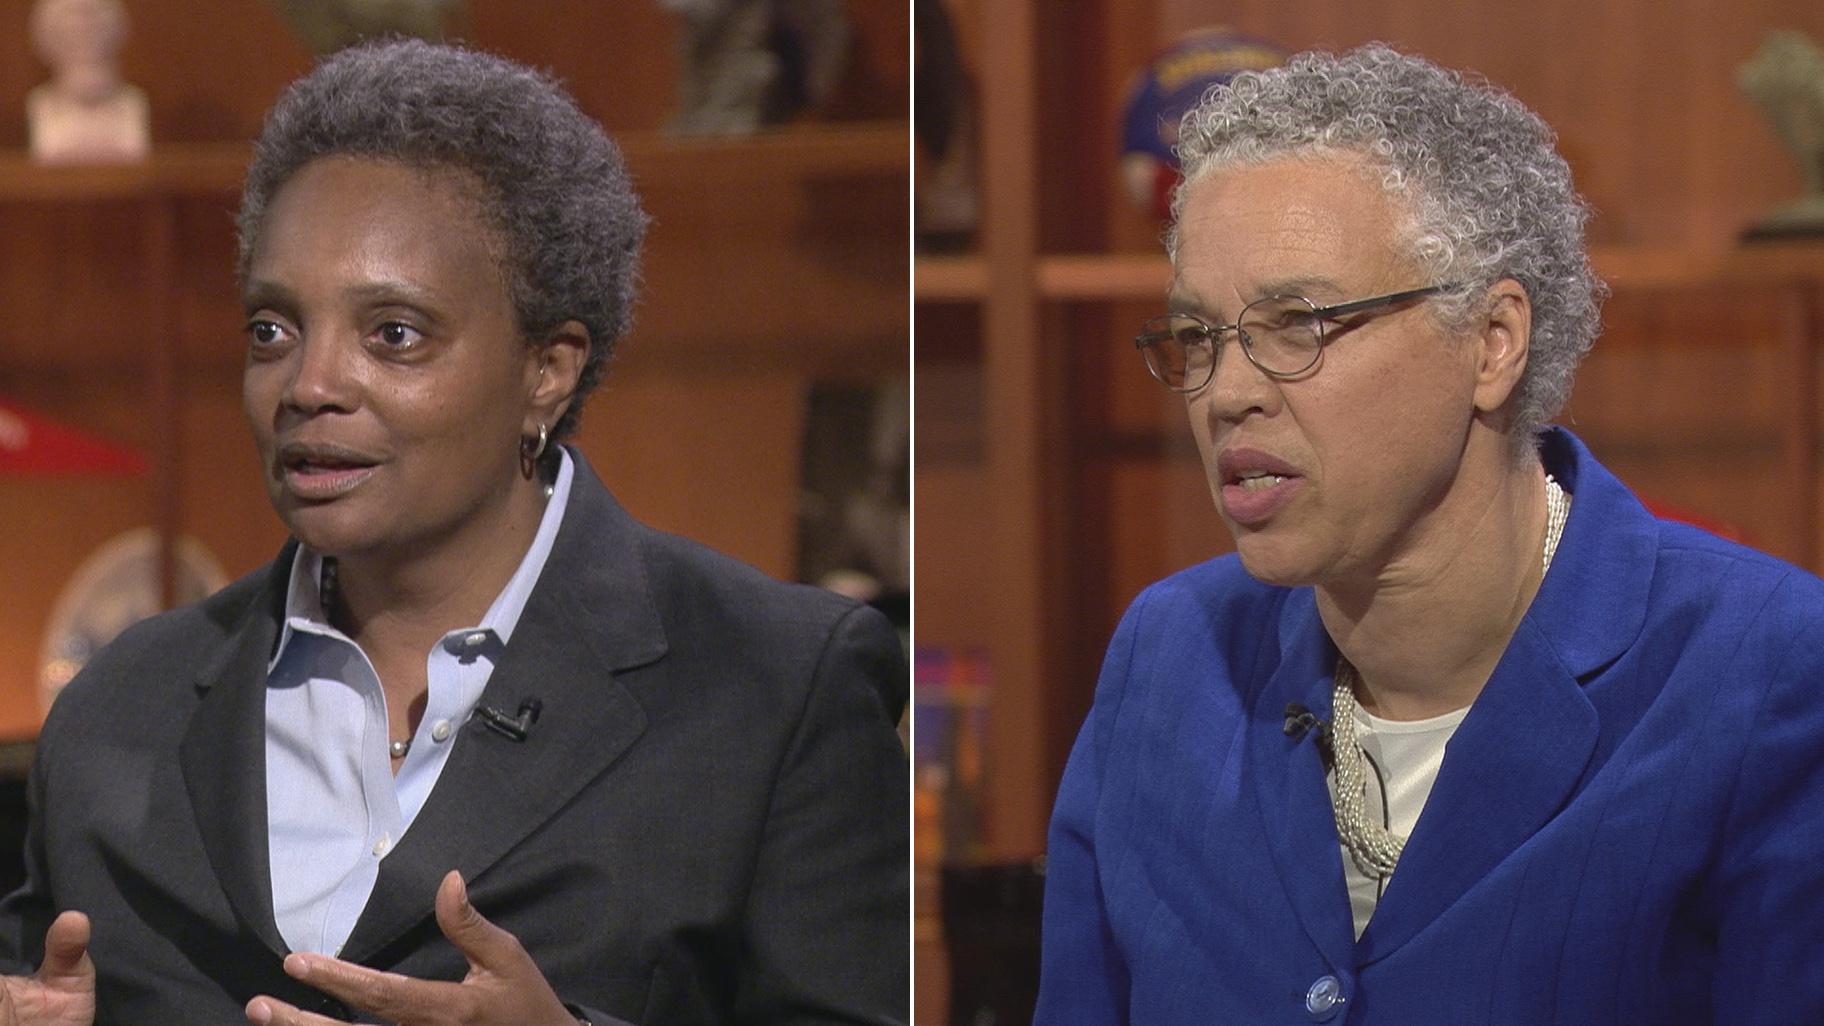 Lori Lightfoot, left, and Toni Preckwinkle appear on “Chicago Tonight” on May 14, 2018 and Oct. 16, 2017, respectively. (WTTW News)